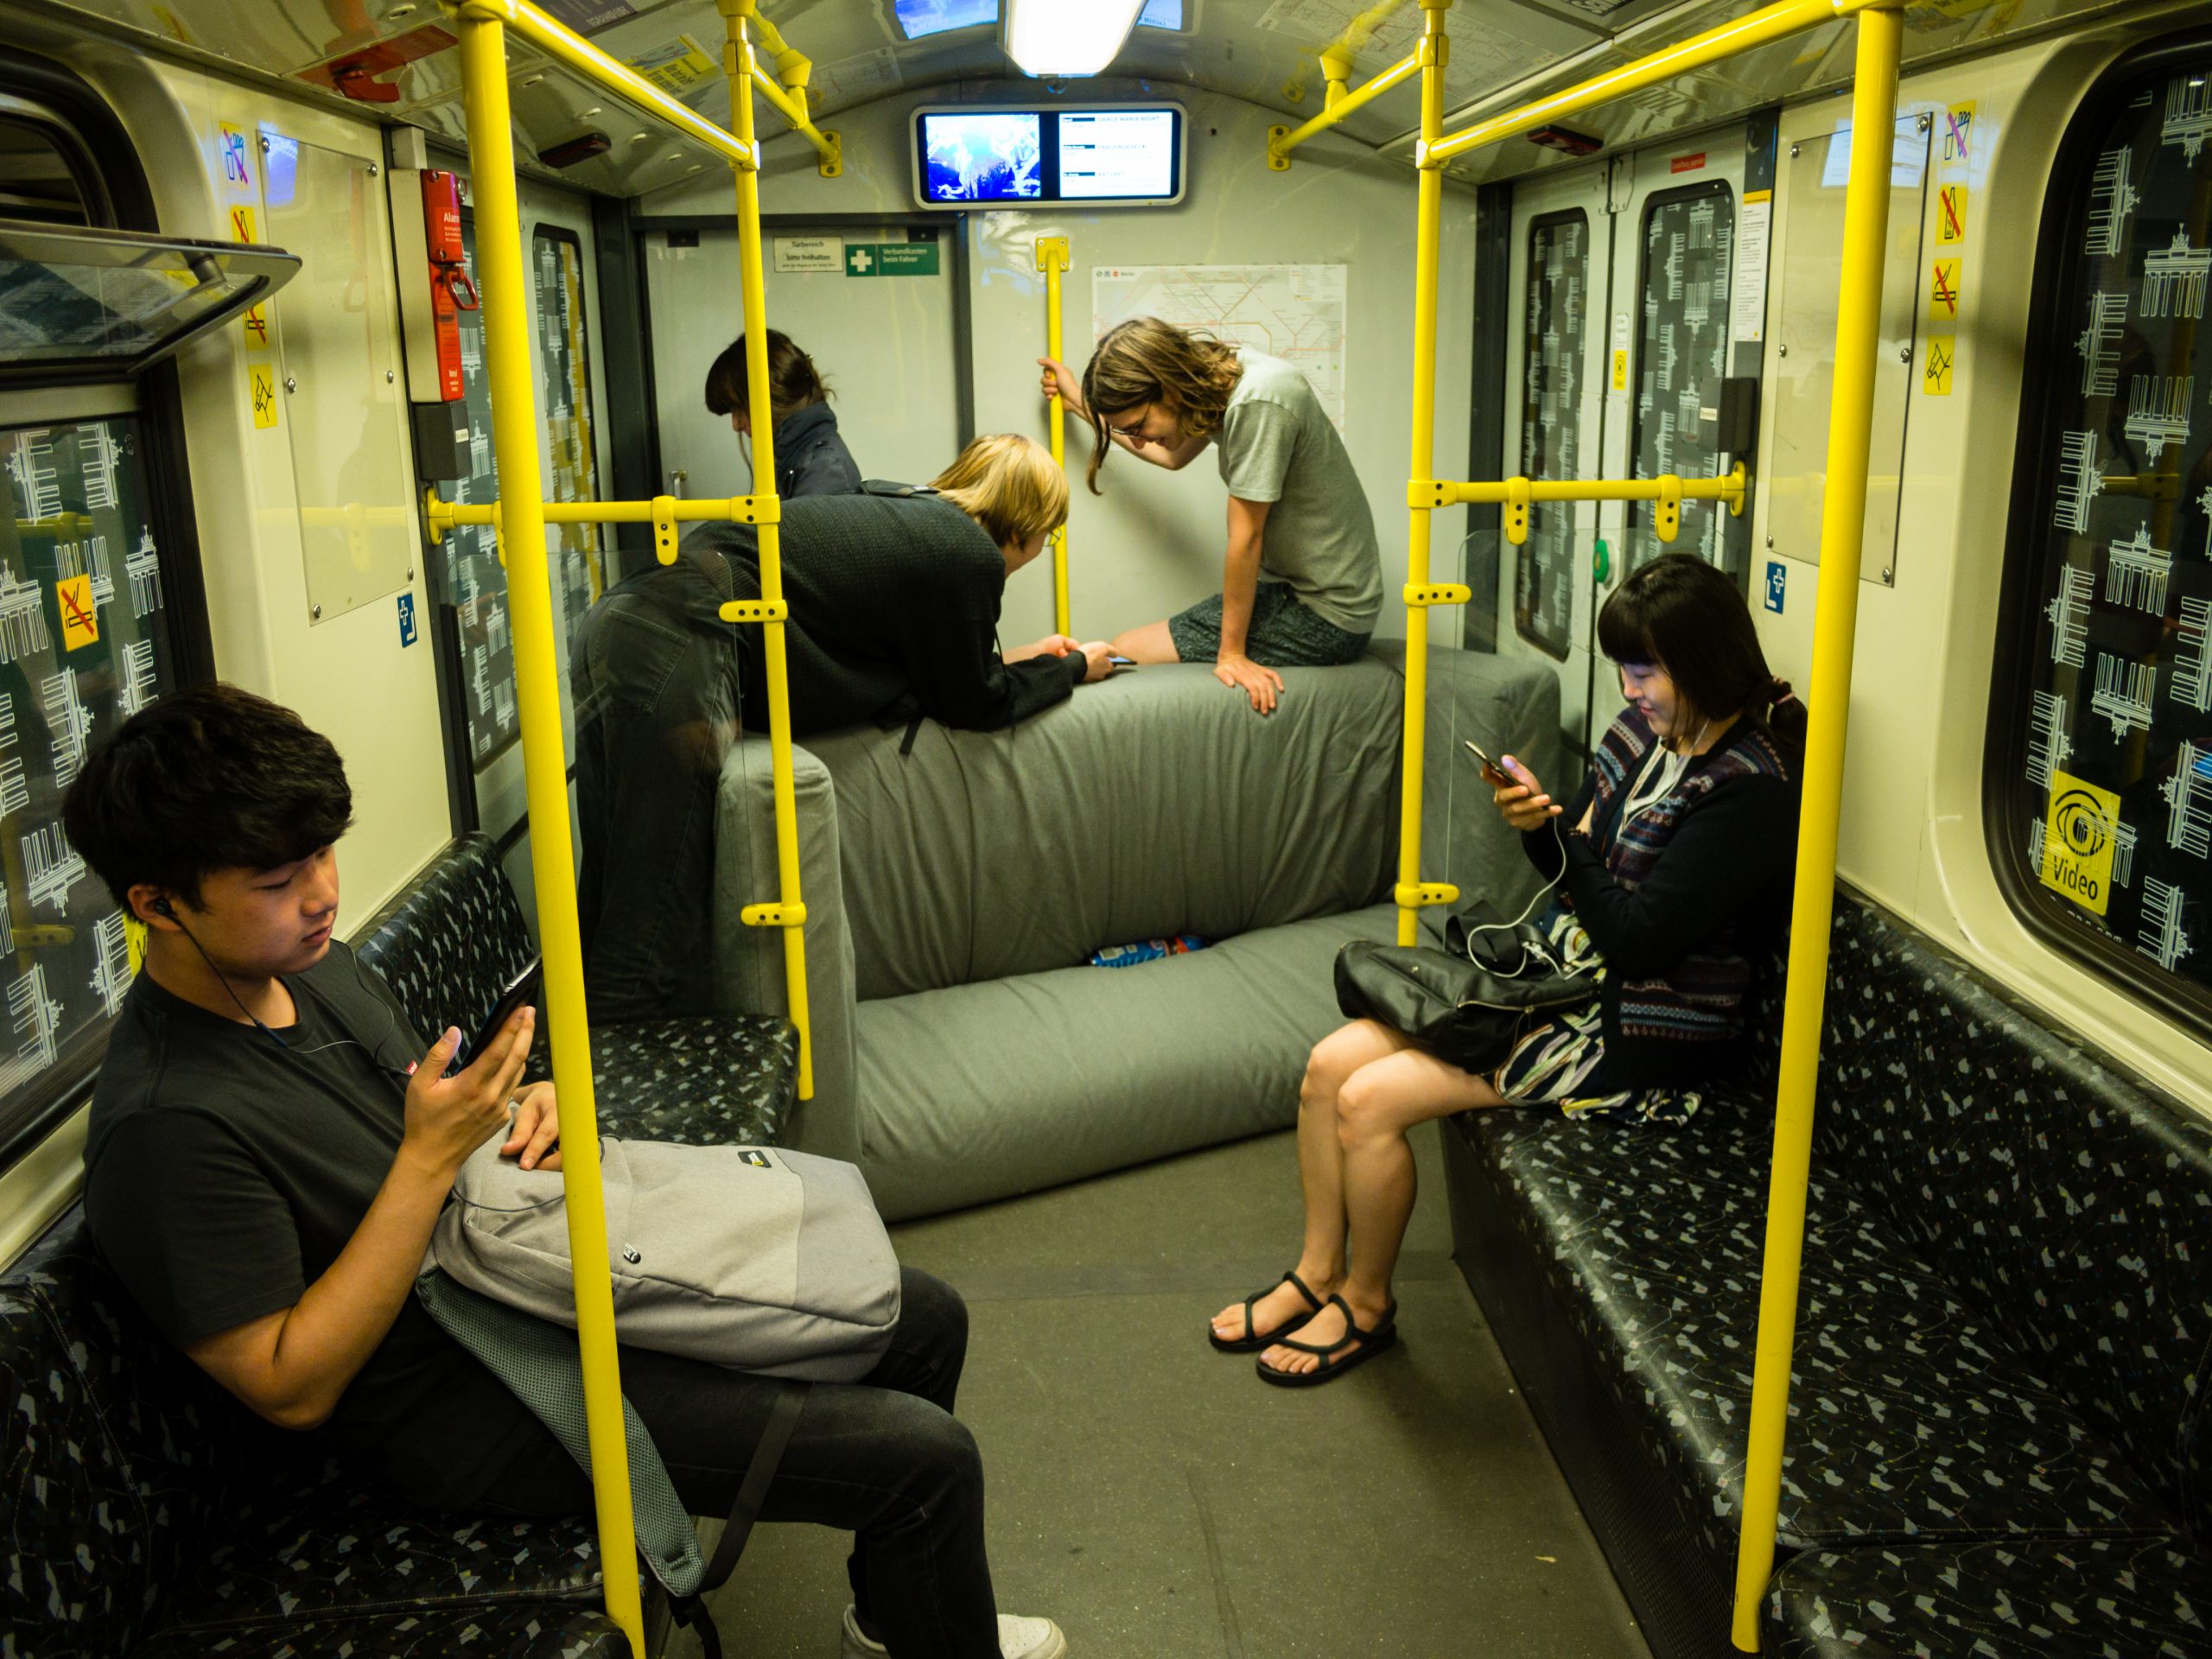 Couch in U-Bahn